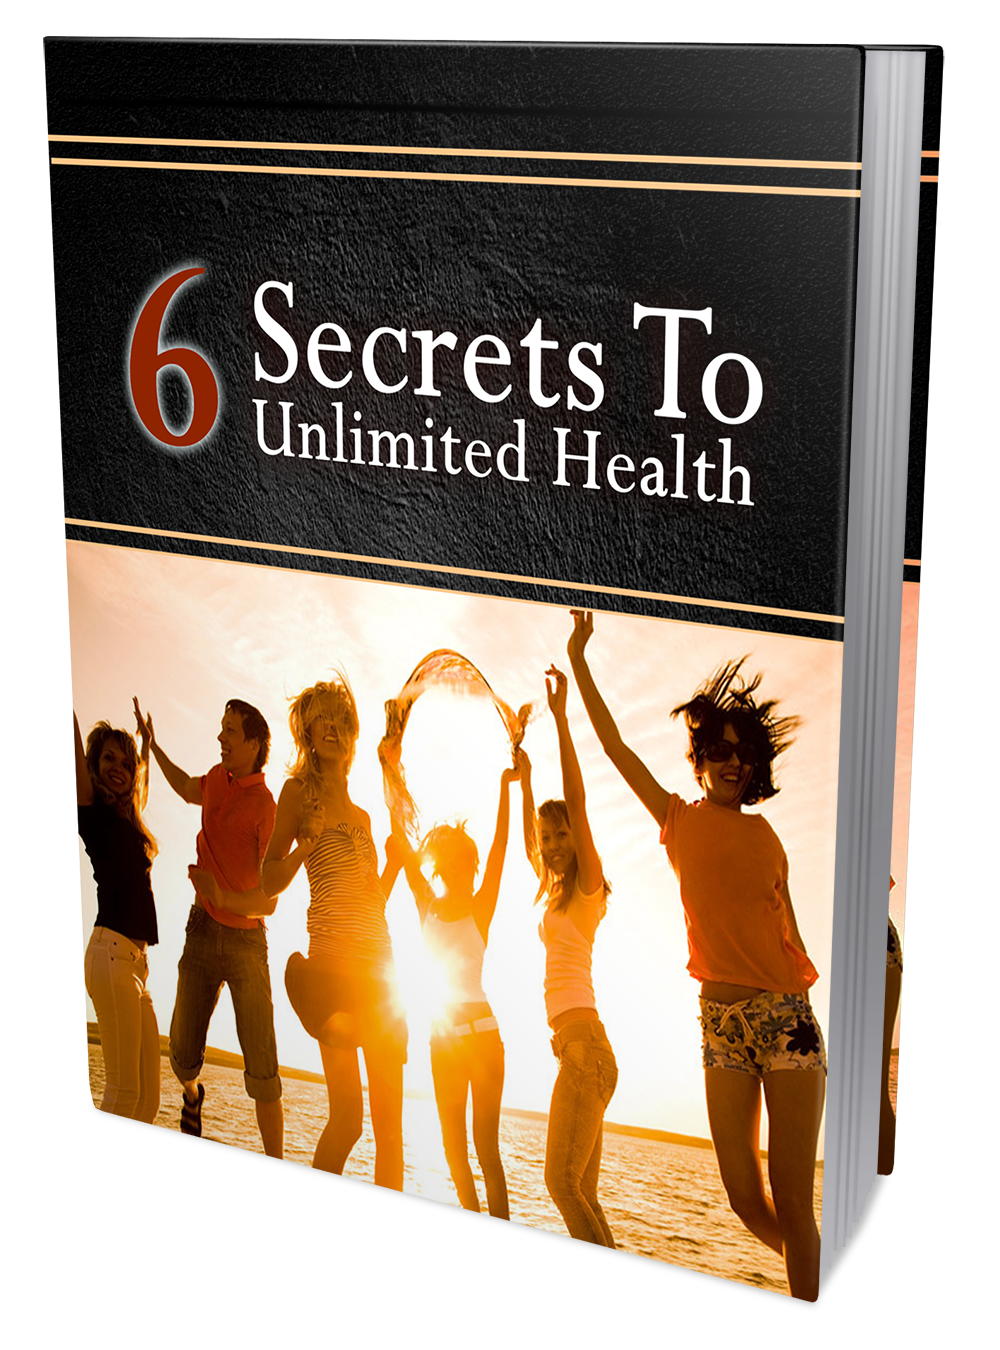 6 secrets to unlimited health